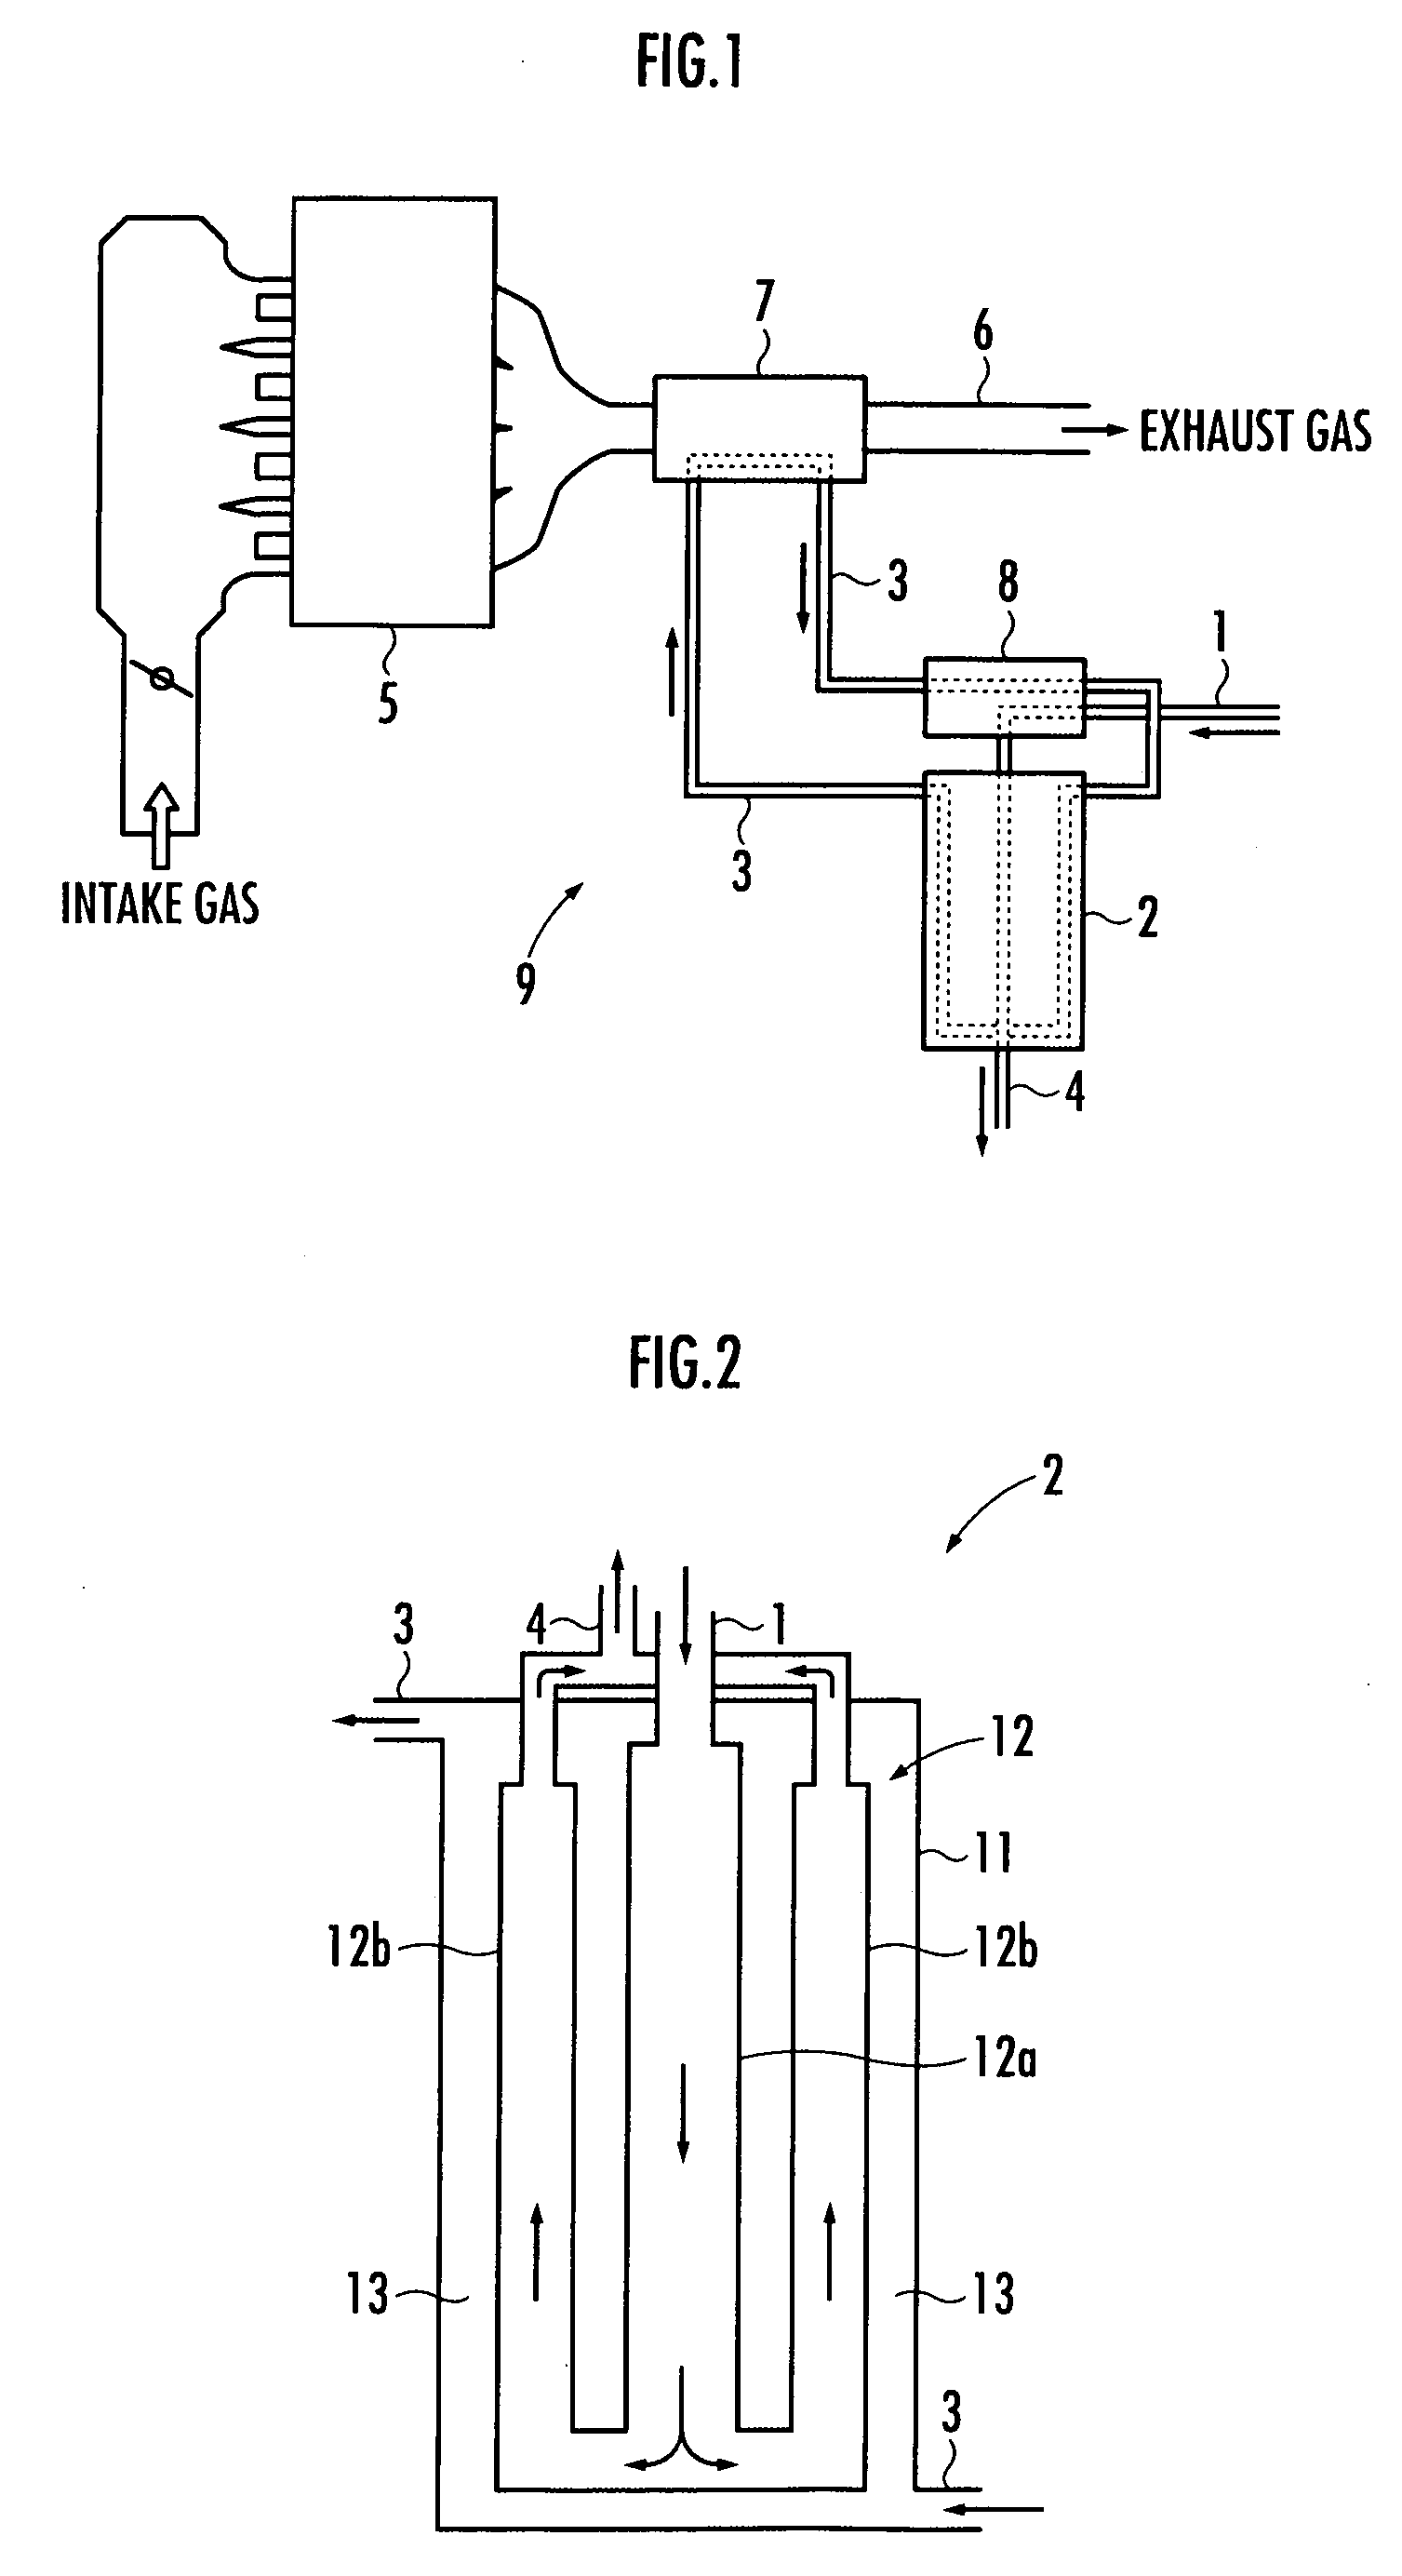 Ethanol fuel reforming system for internal combustion engines